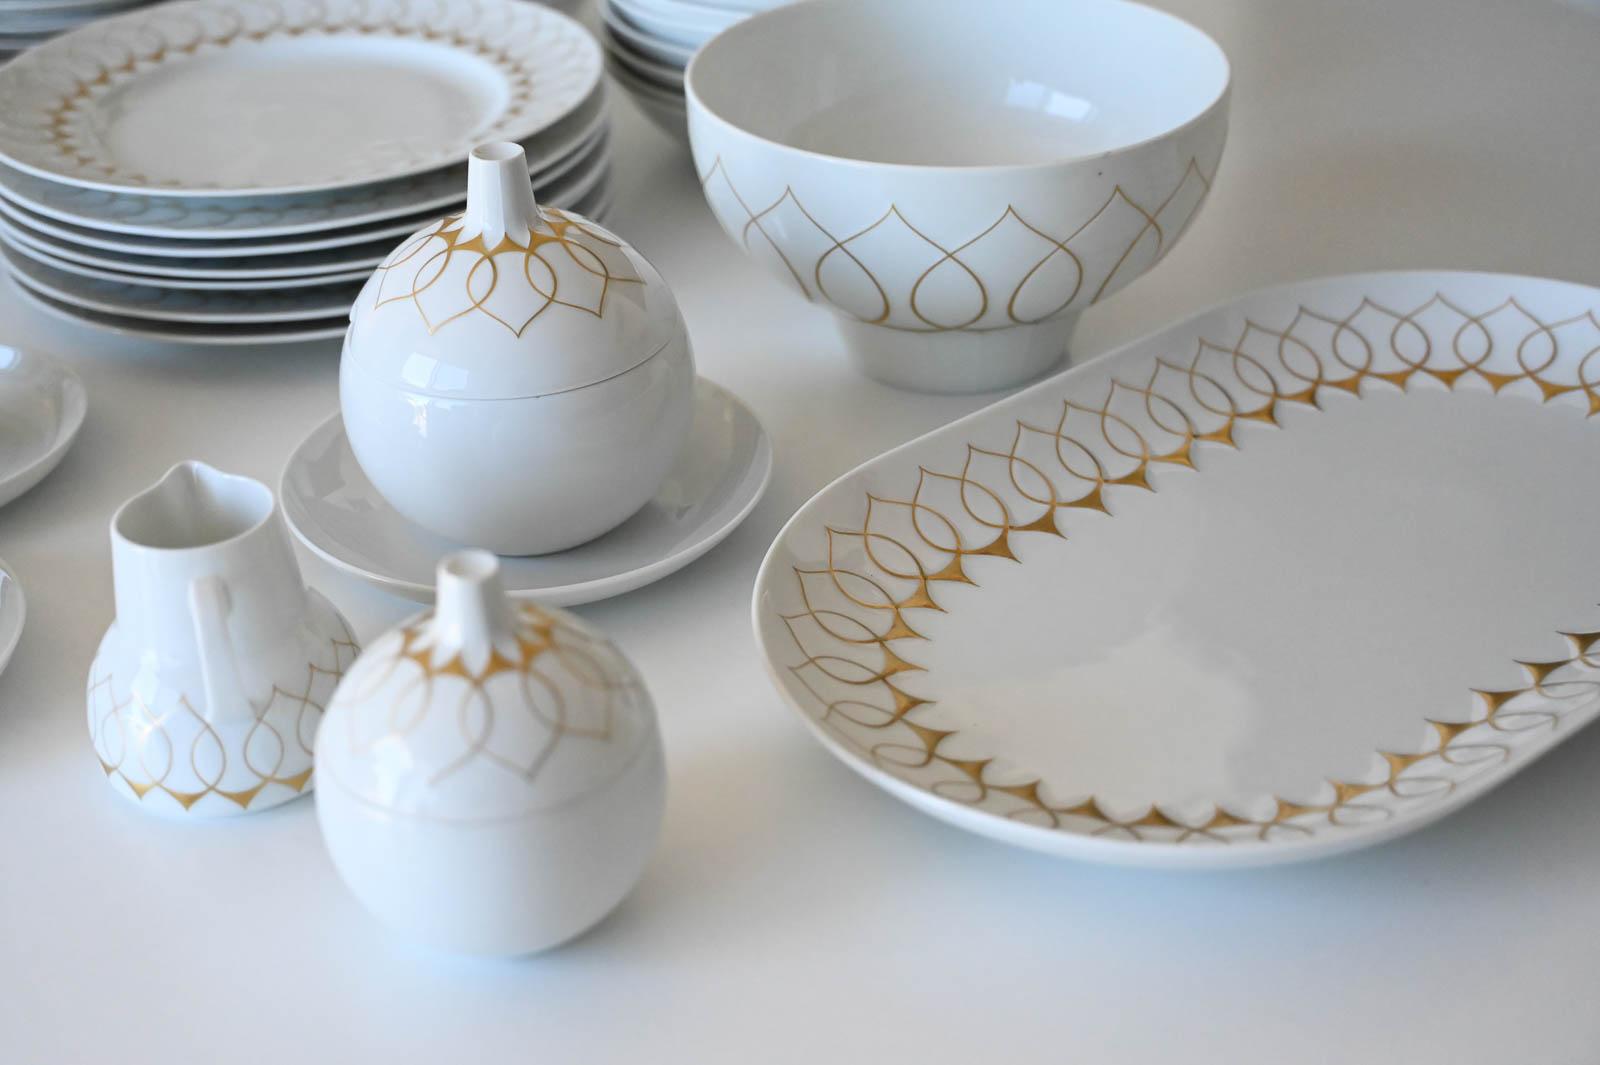 Bjorn Wiinblad for Rosenthal Gold Lotus Silhouette Tableware, Service for 8 In Good Condition For Sale In Costa Mesa, CA